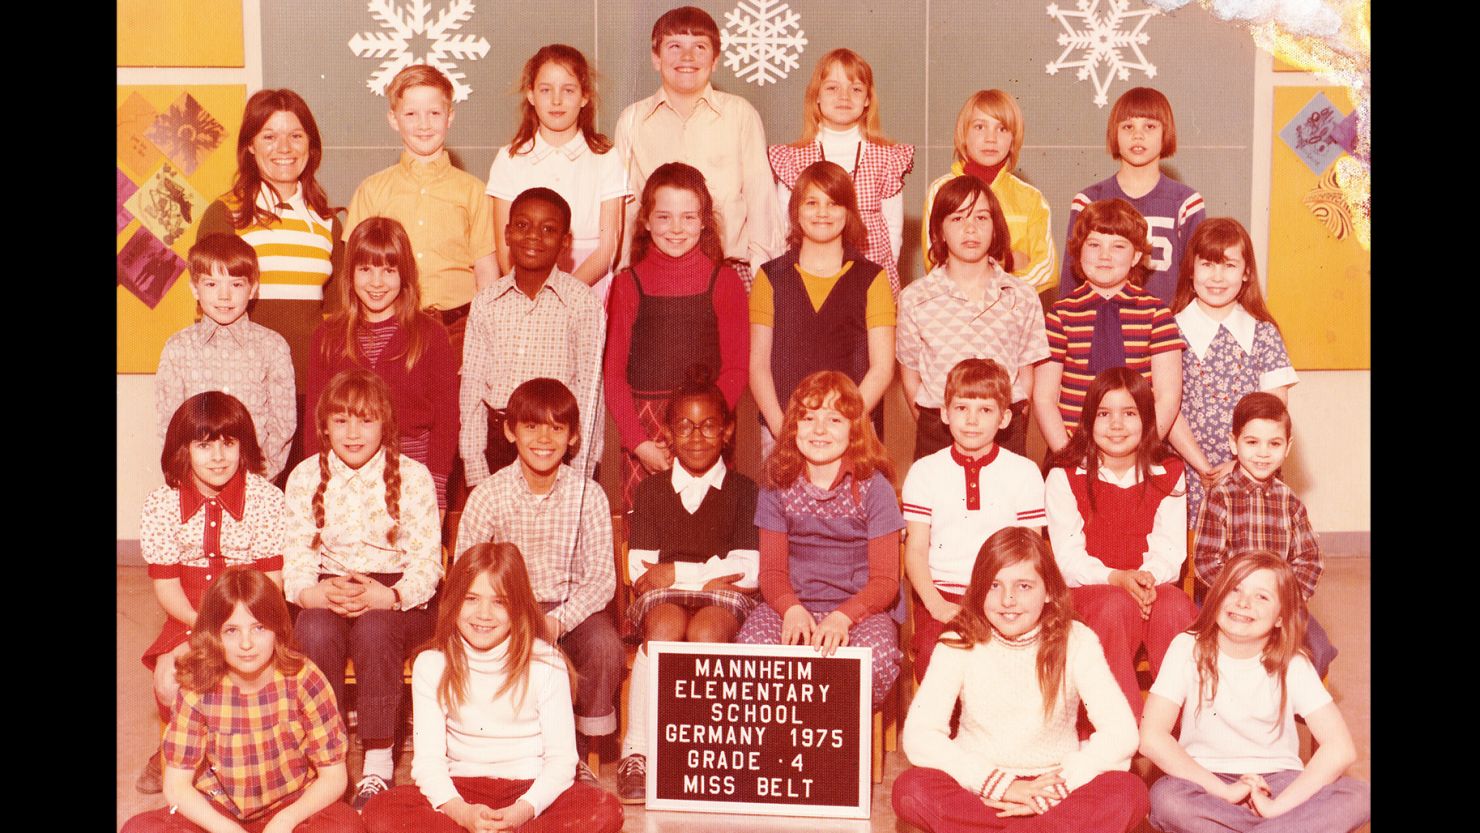 Elizabeth Moore, last on left in second row, in her fourth-grade class photo with Barbara Belt, left, top row.